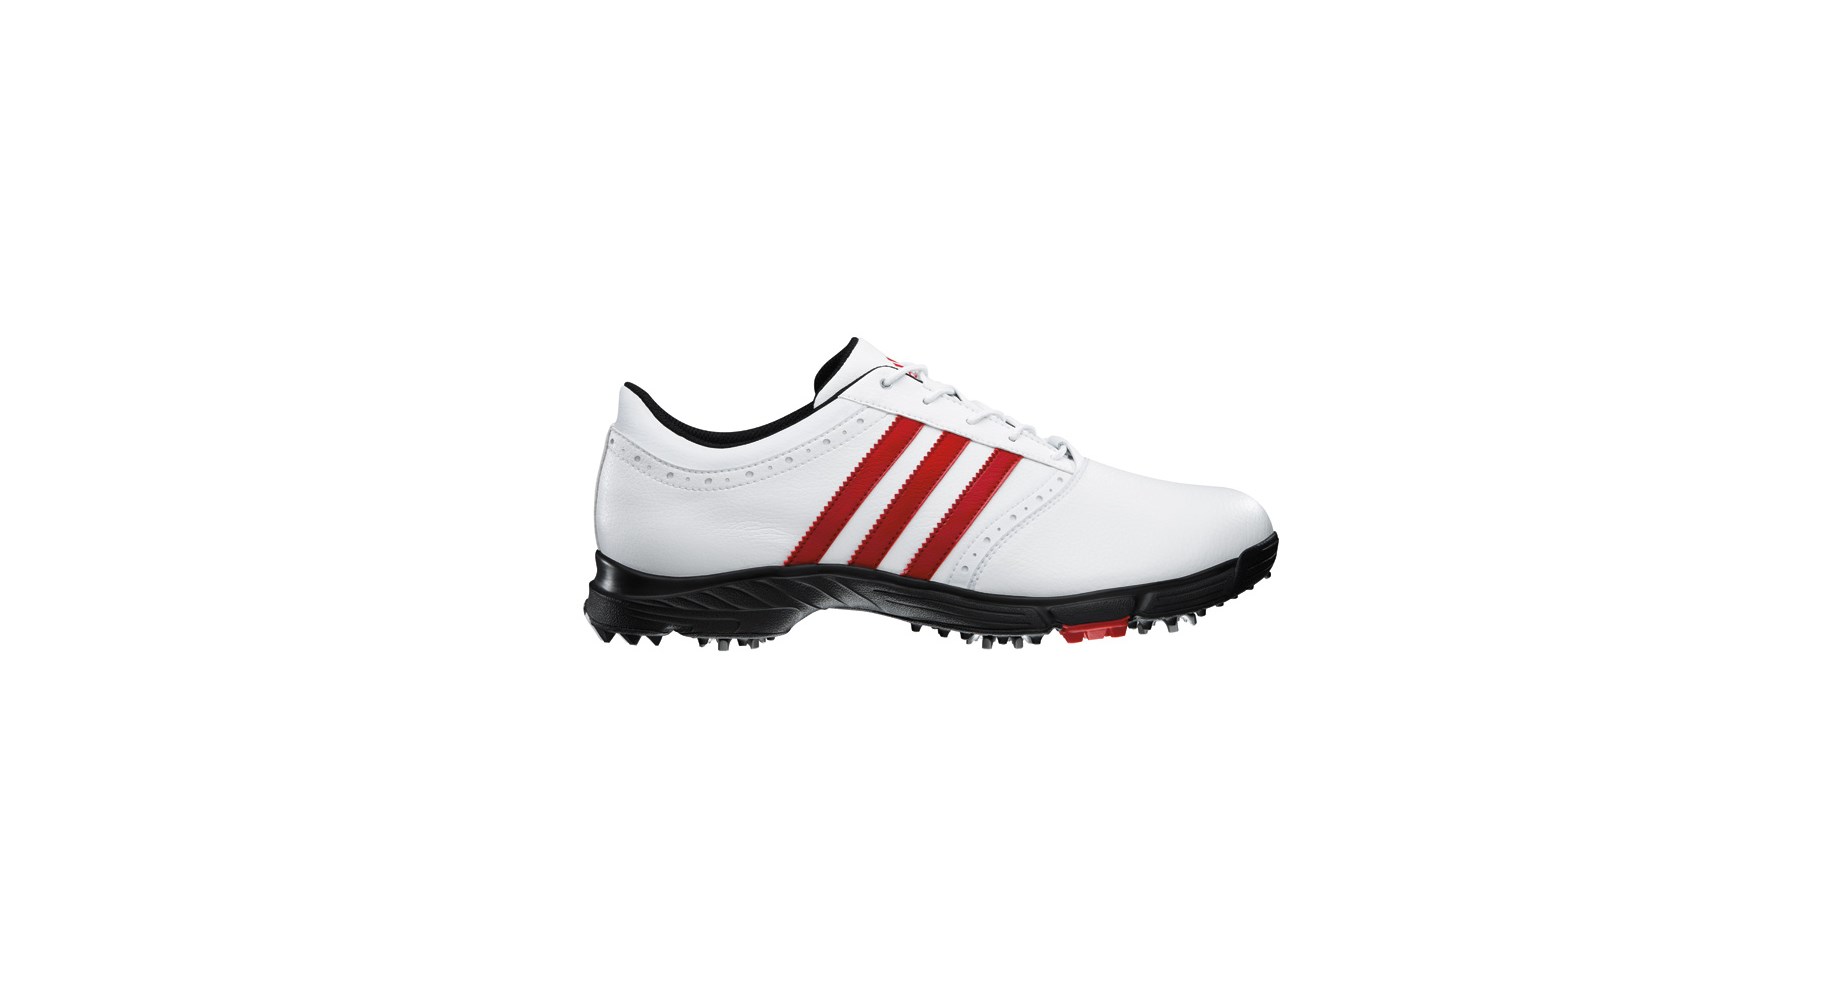 adidas Golflite 5 Golf Shoes (White/Red)